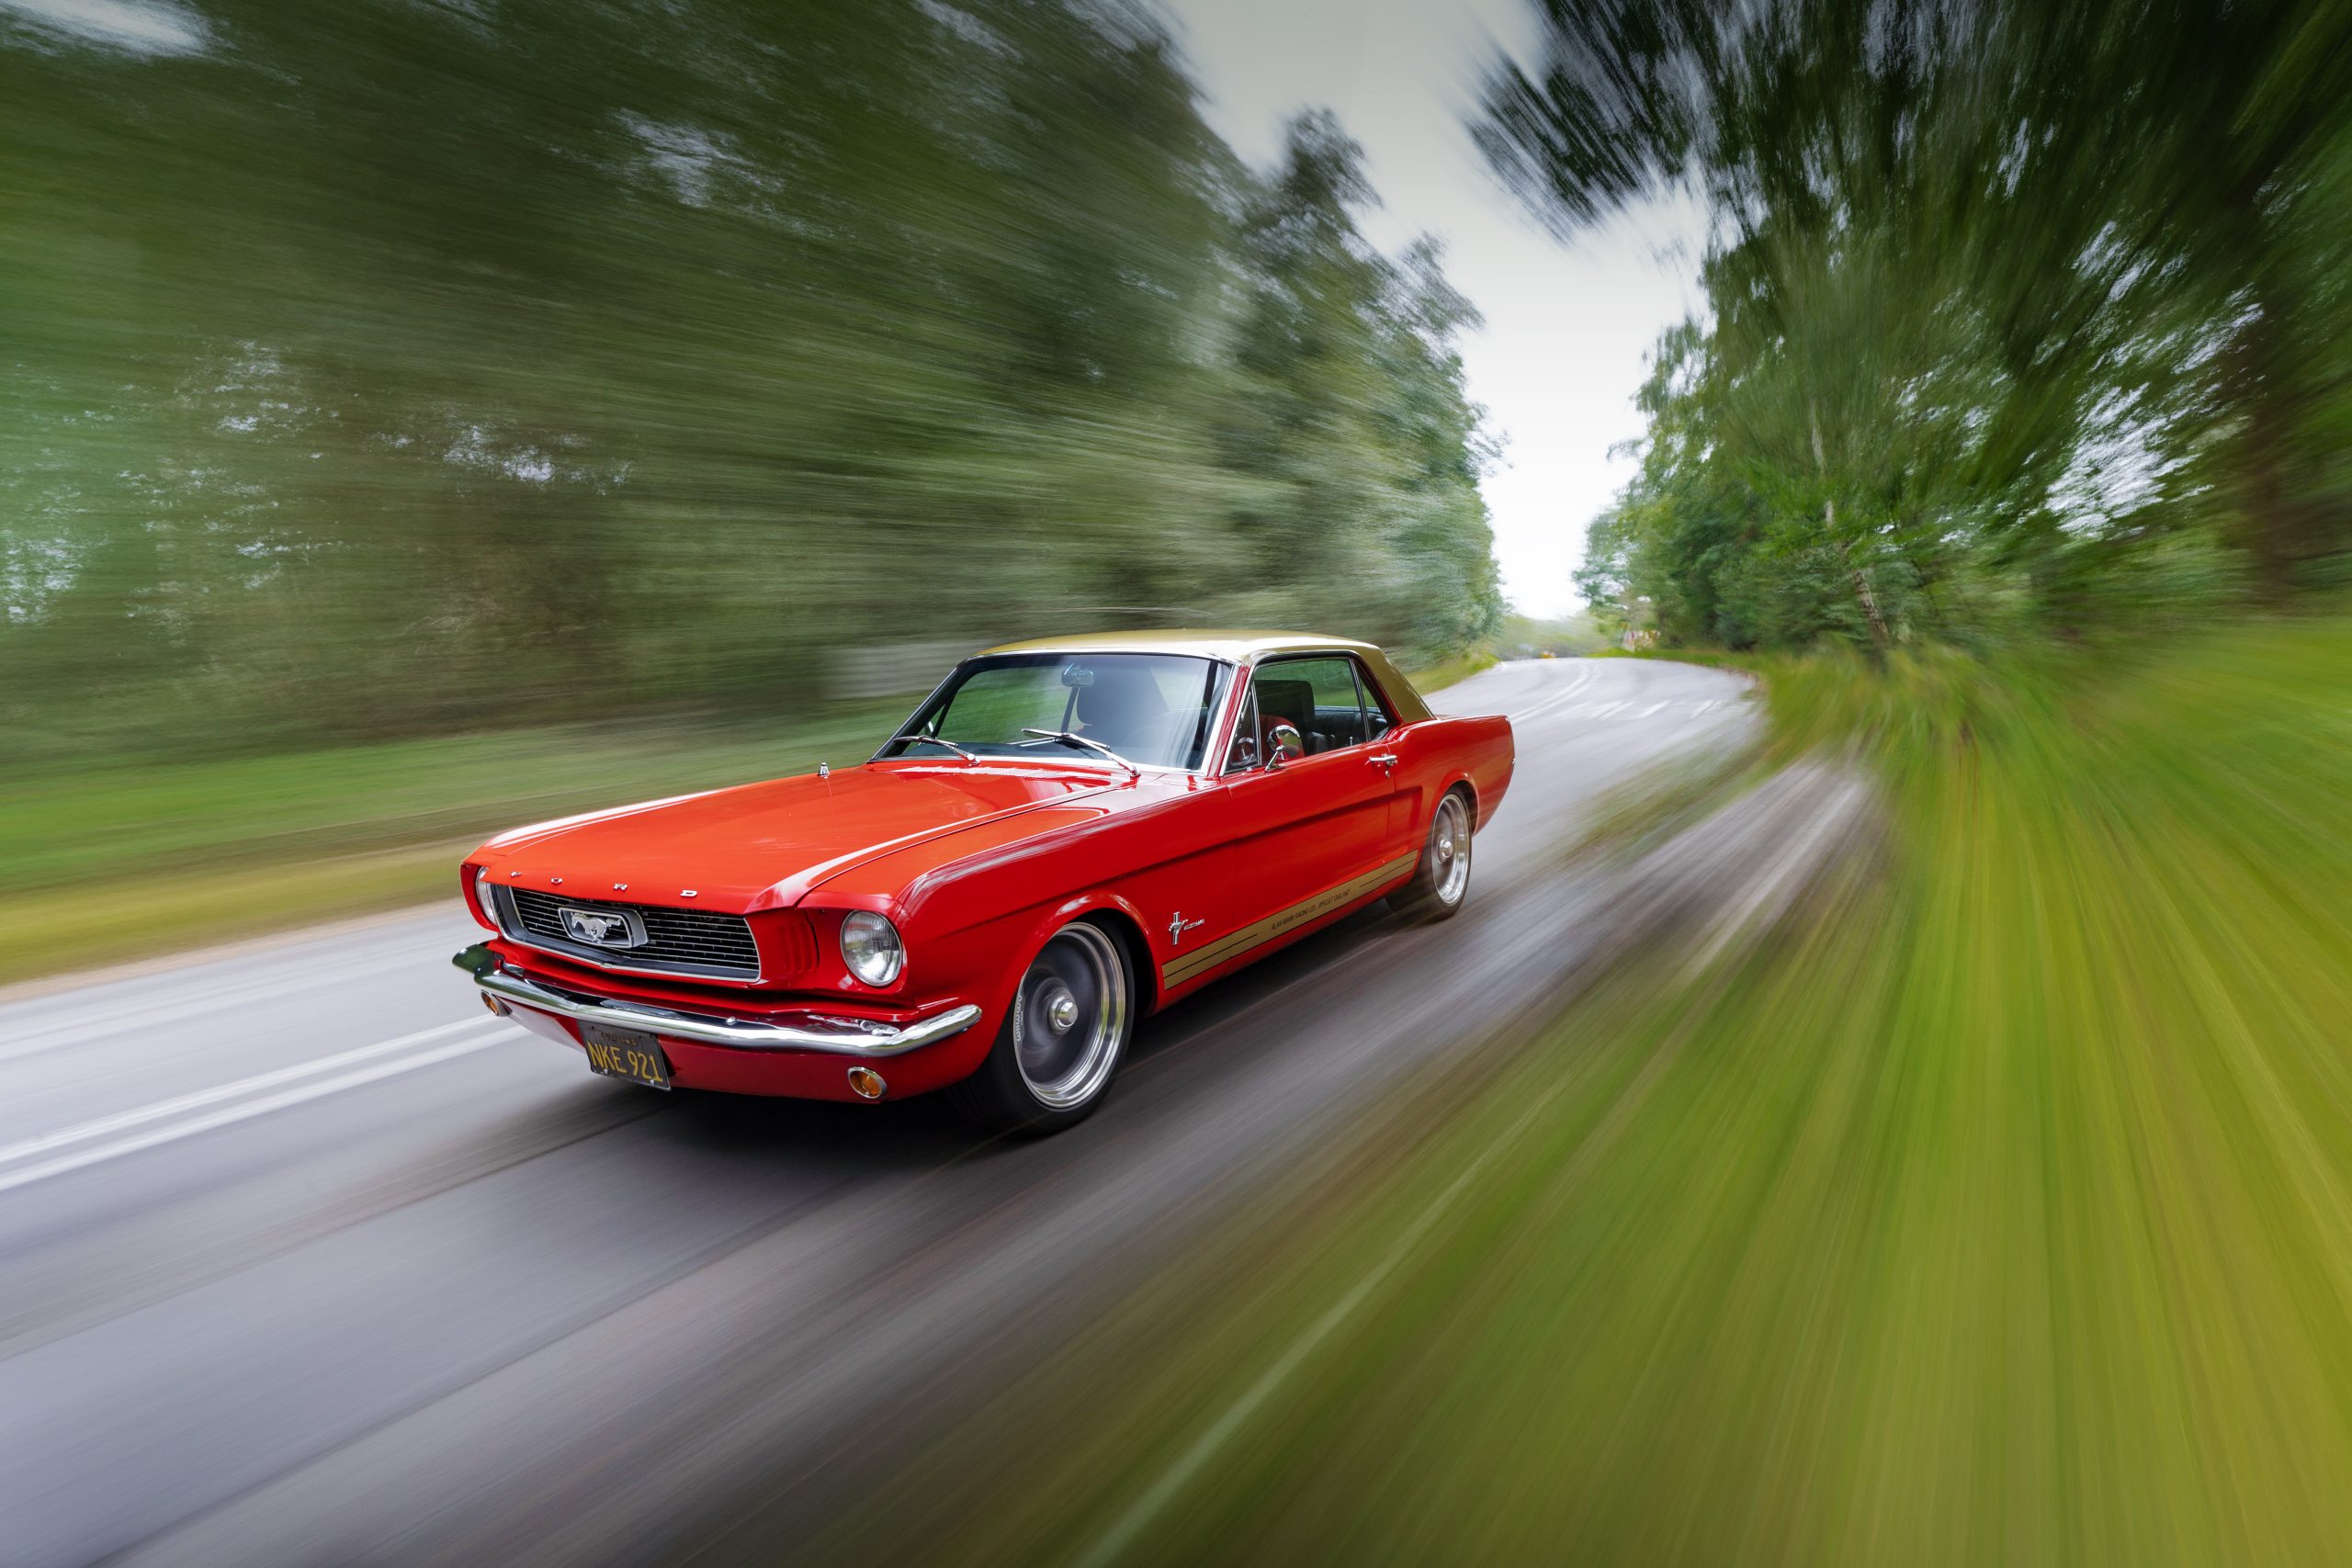 Would you say “yay” or “neigh” to this electro-mod Mustang?